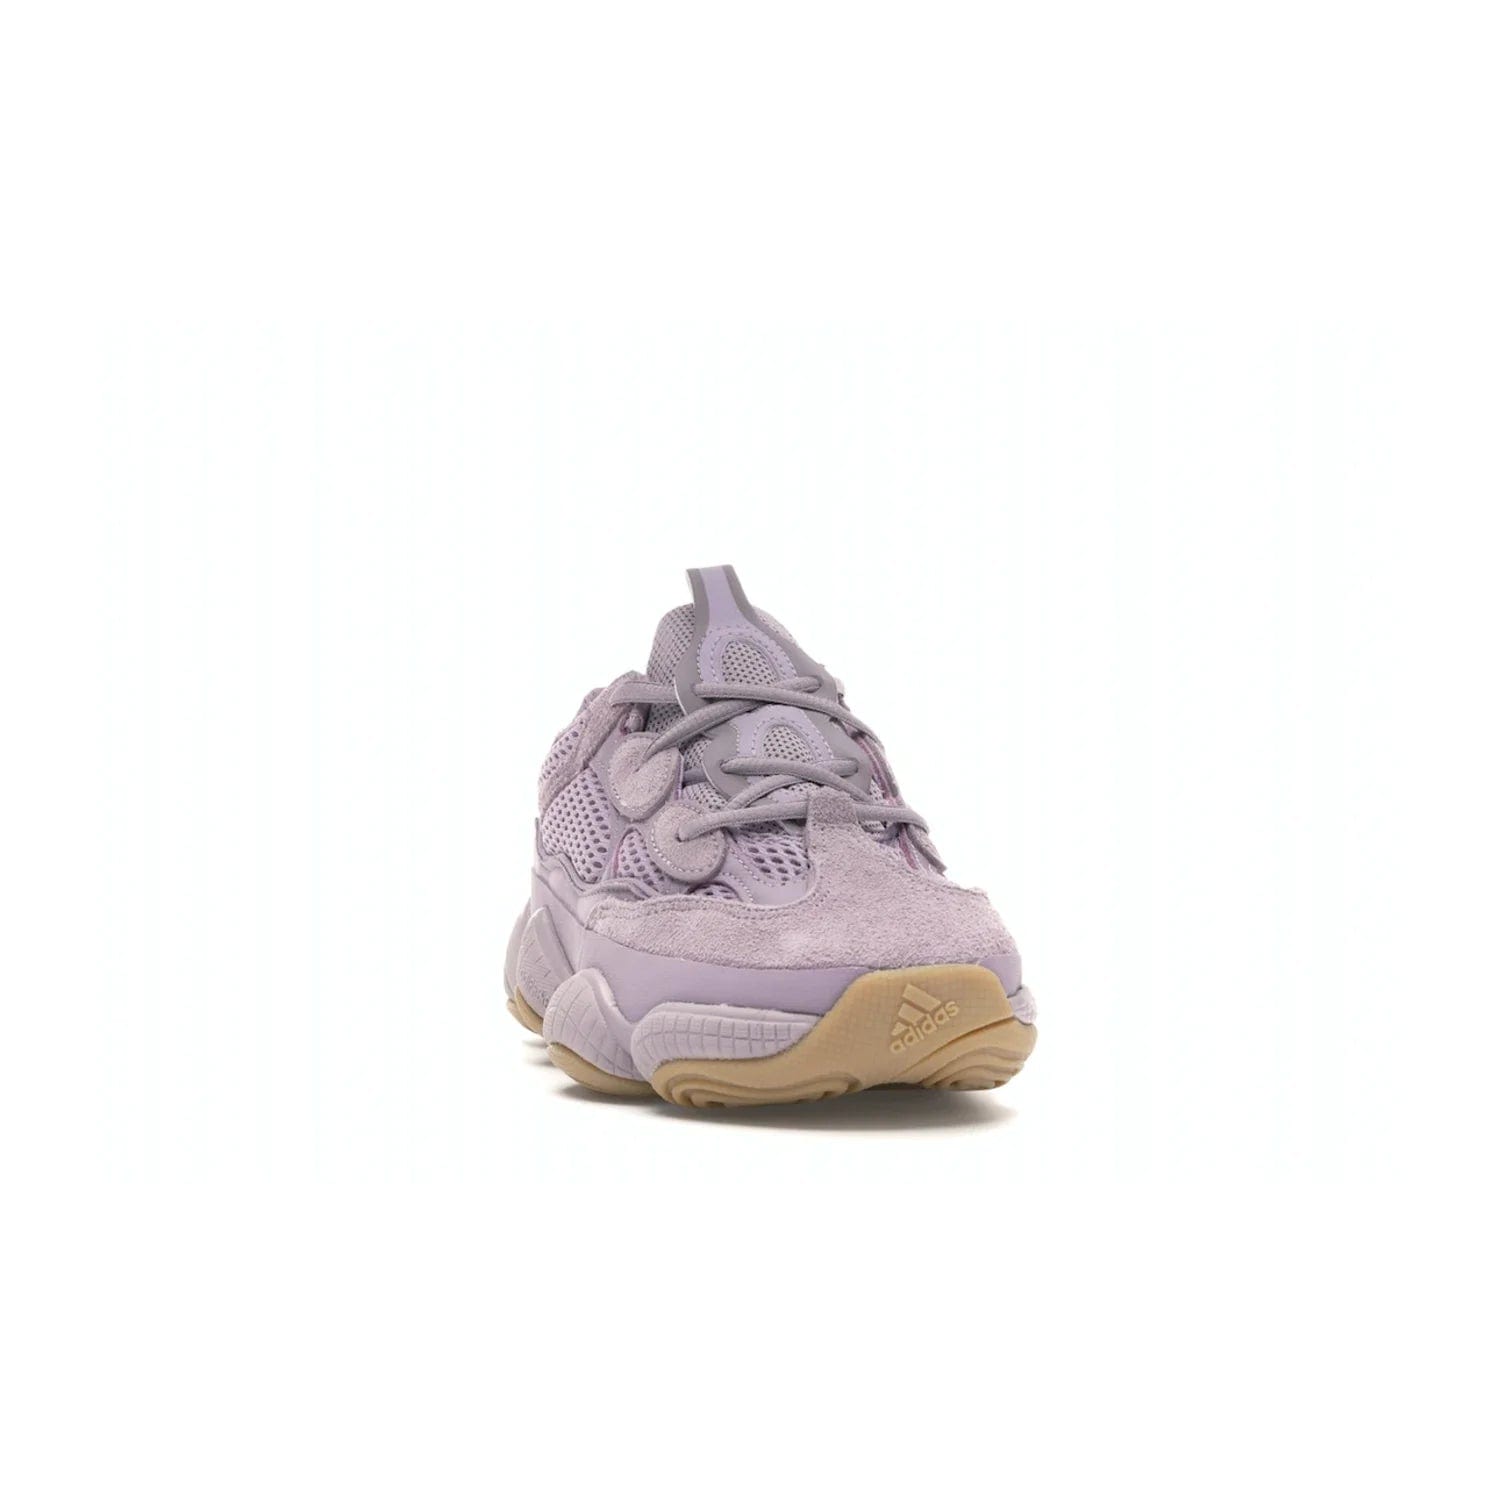 adidas Yeezy 500 Soft Vision - Image 8 - Only at www.BallersClubKickz.com - New adidas Yeezy 500 Soft Vision sneaker featuring a combination of mesh, leather, and suede in a classic Soft Vision colorway. Gum rubber outsole ensures durability and traction. An everyday sneaker that stands out from the crowd.